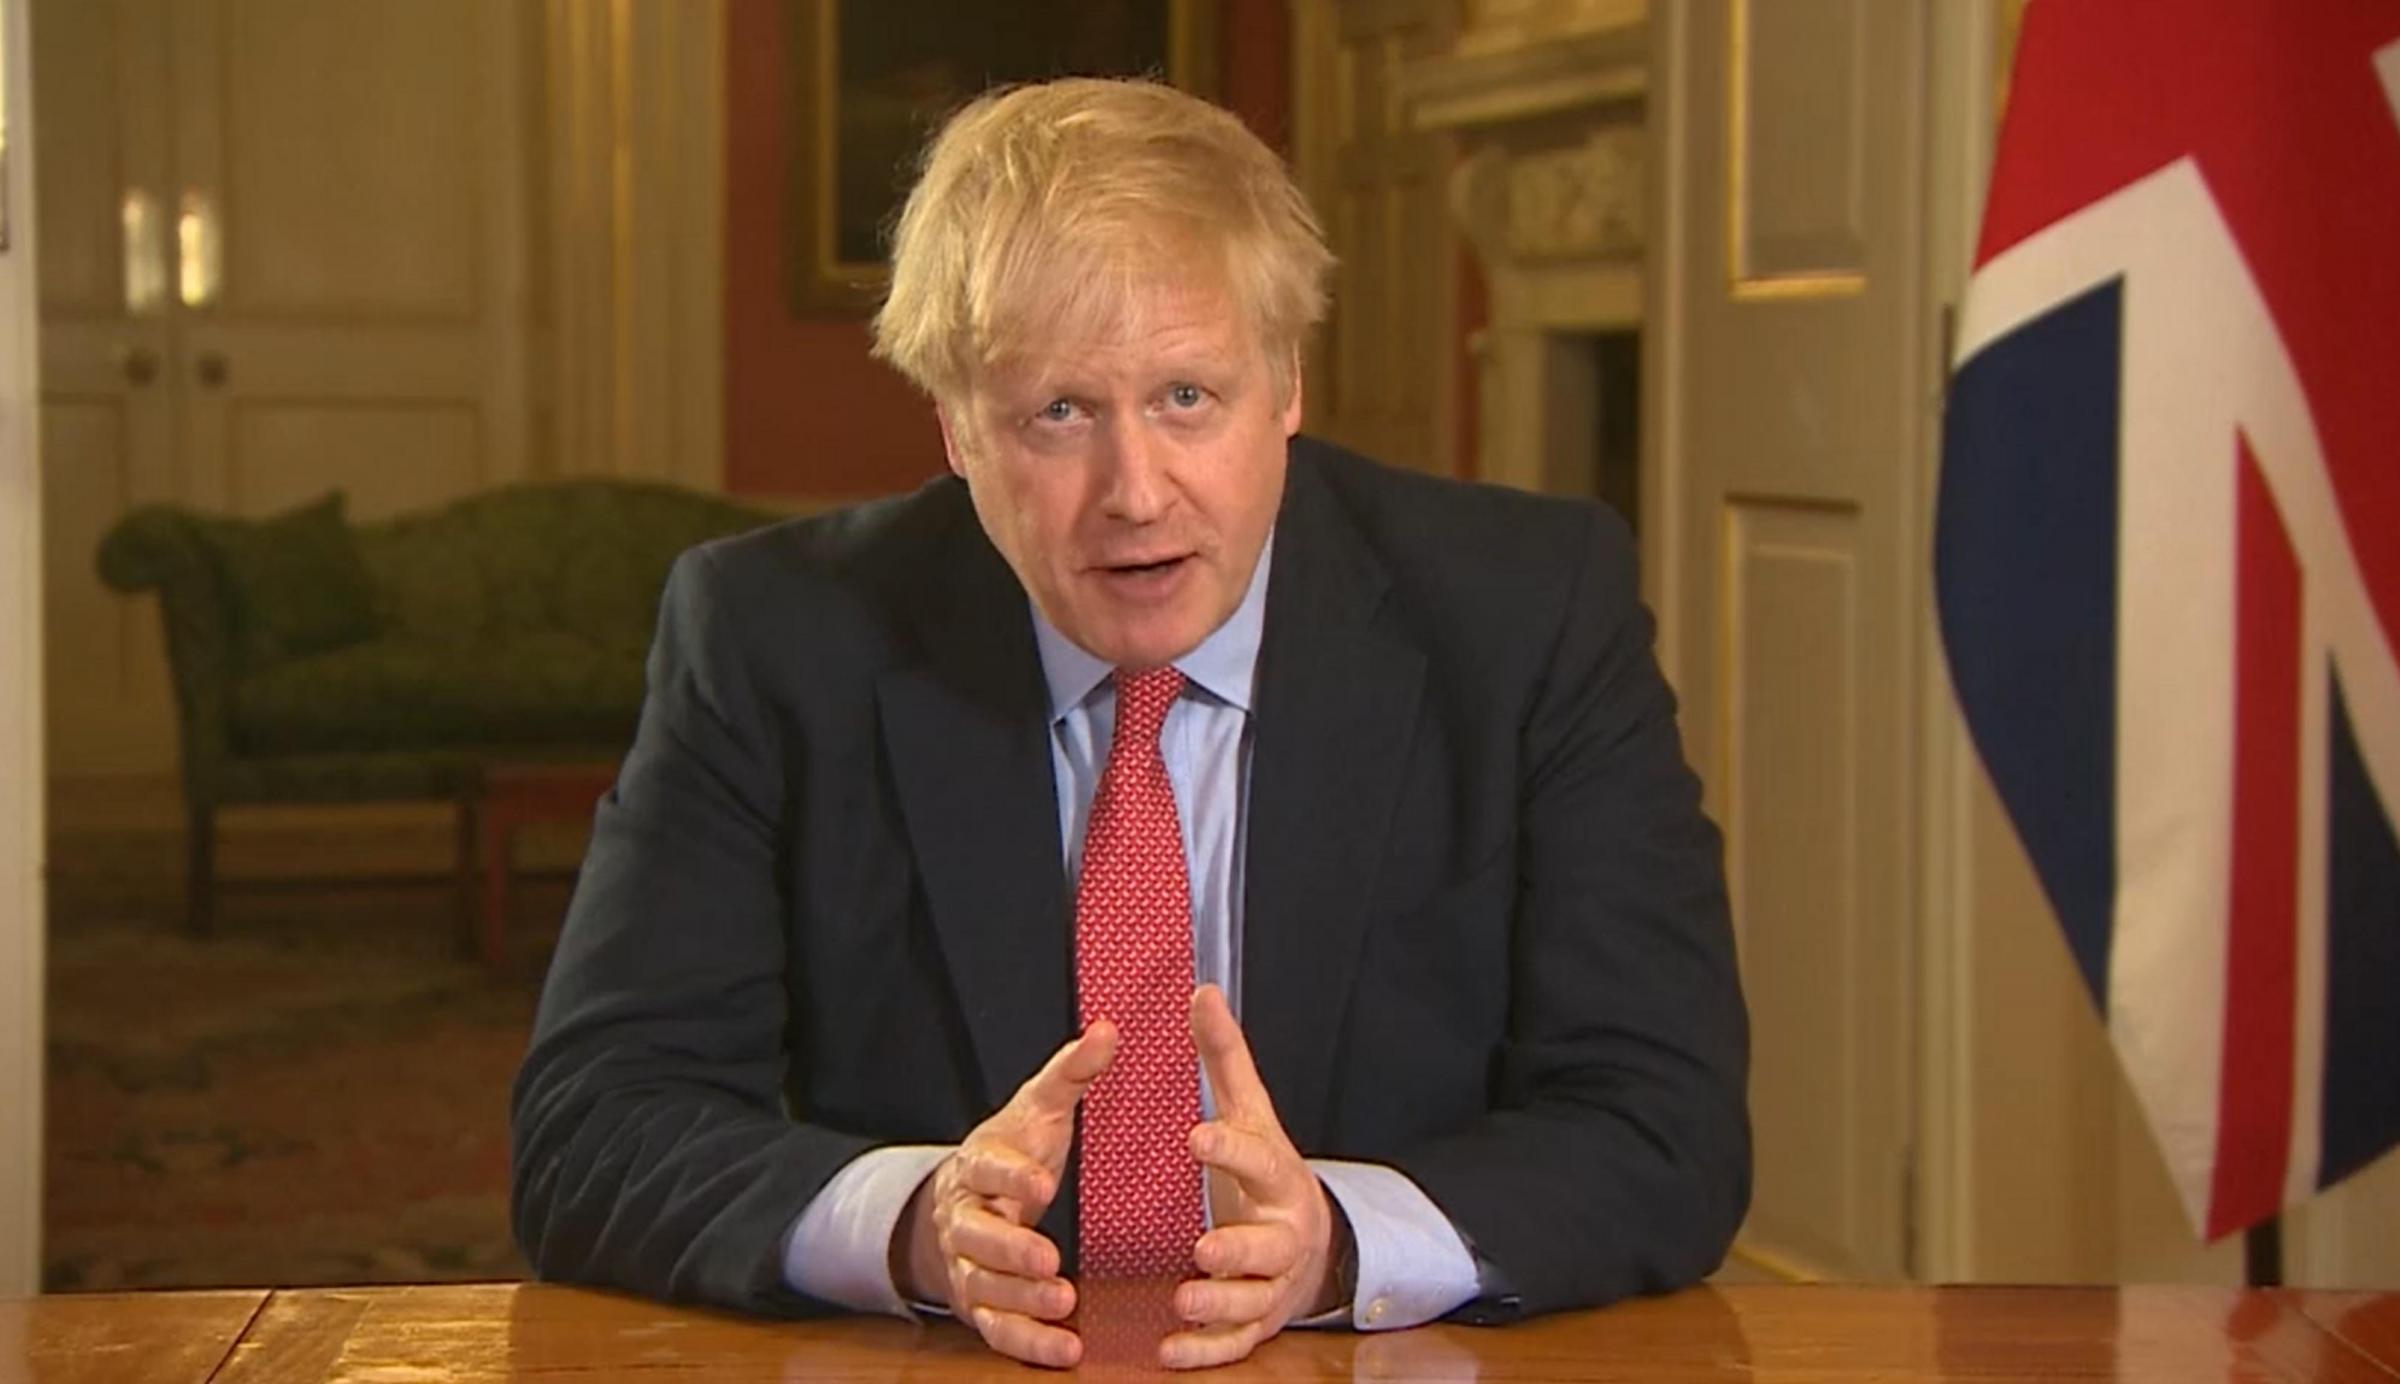 Screen grab of Prime Minister Boris Johnson addressing the nation from 10 Downing Street, London, as he placed the UK on lockdown as the Government seeks to stop the spread of coronavirus (COVID-19). PA Photo. Picture date: Monday March 23, 2020. See PA